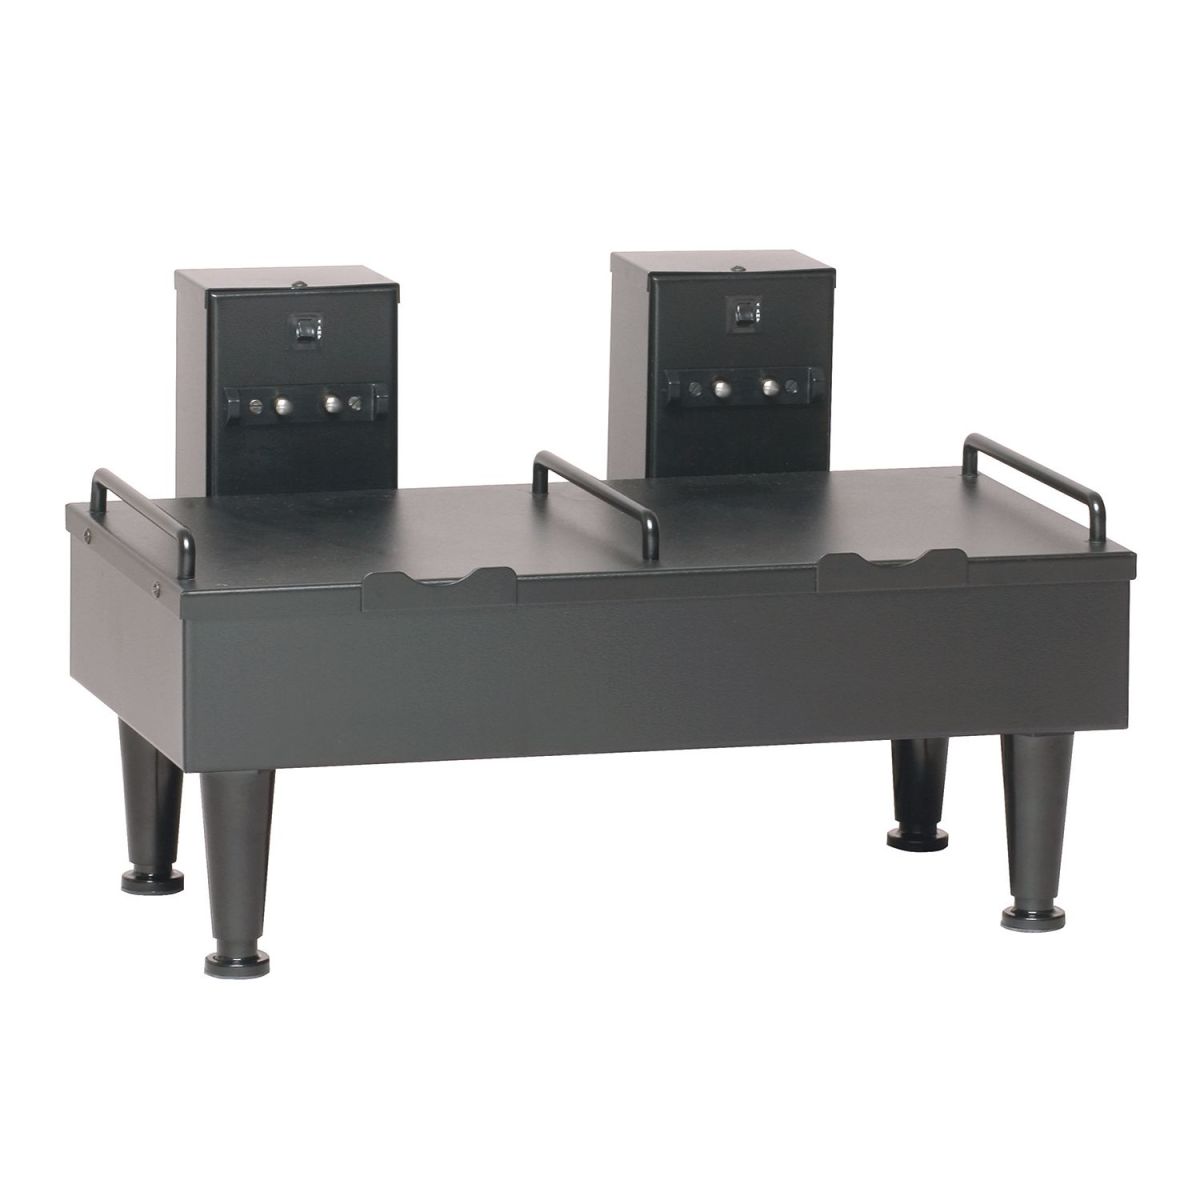 2SH Soft Heat Stand, Stainless Steel